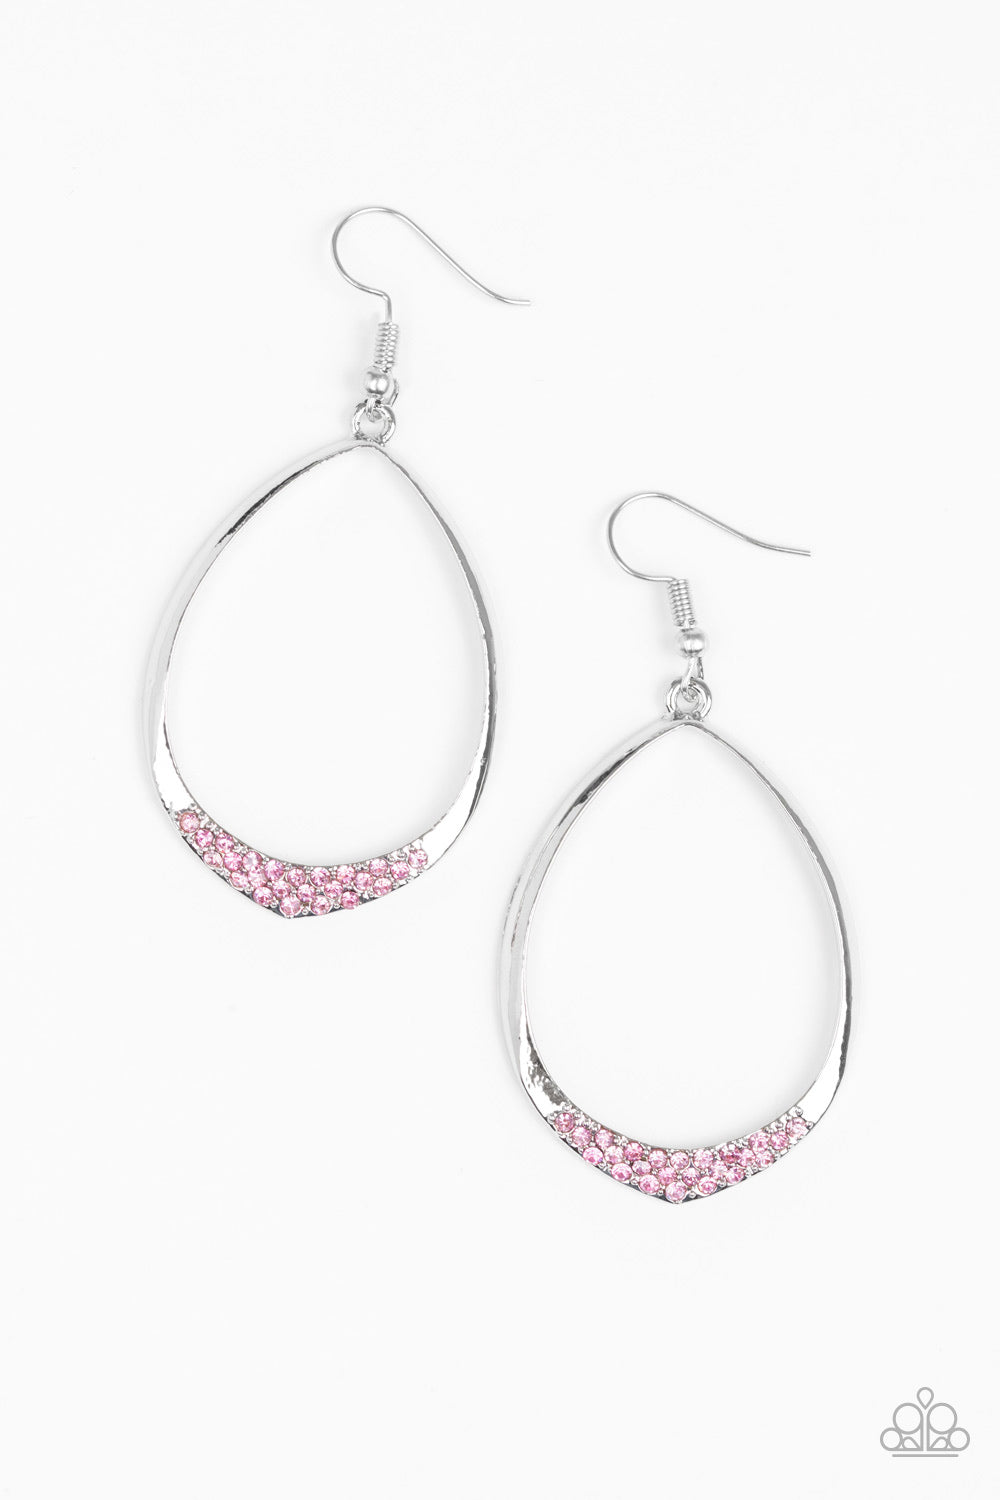 REIGN Down - Pink Earrings - Paparazzi Accessories - Paparazzi Accessories 